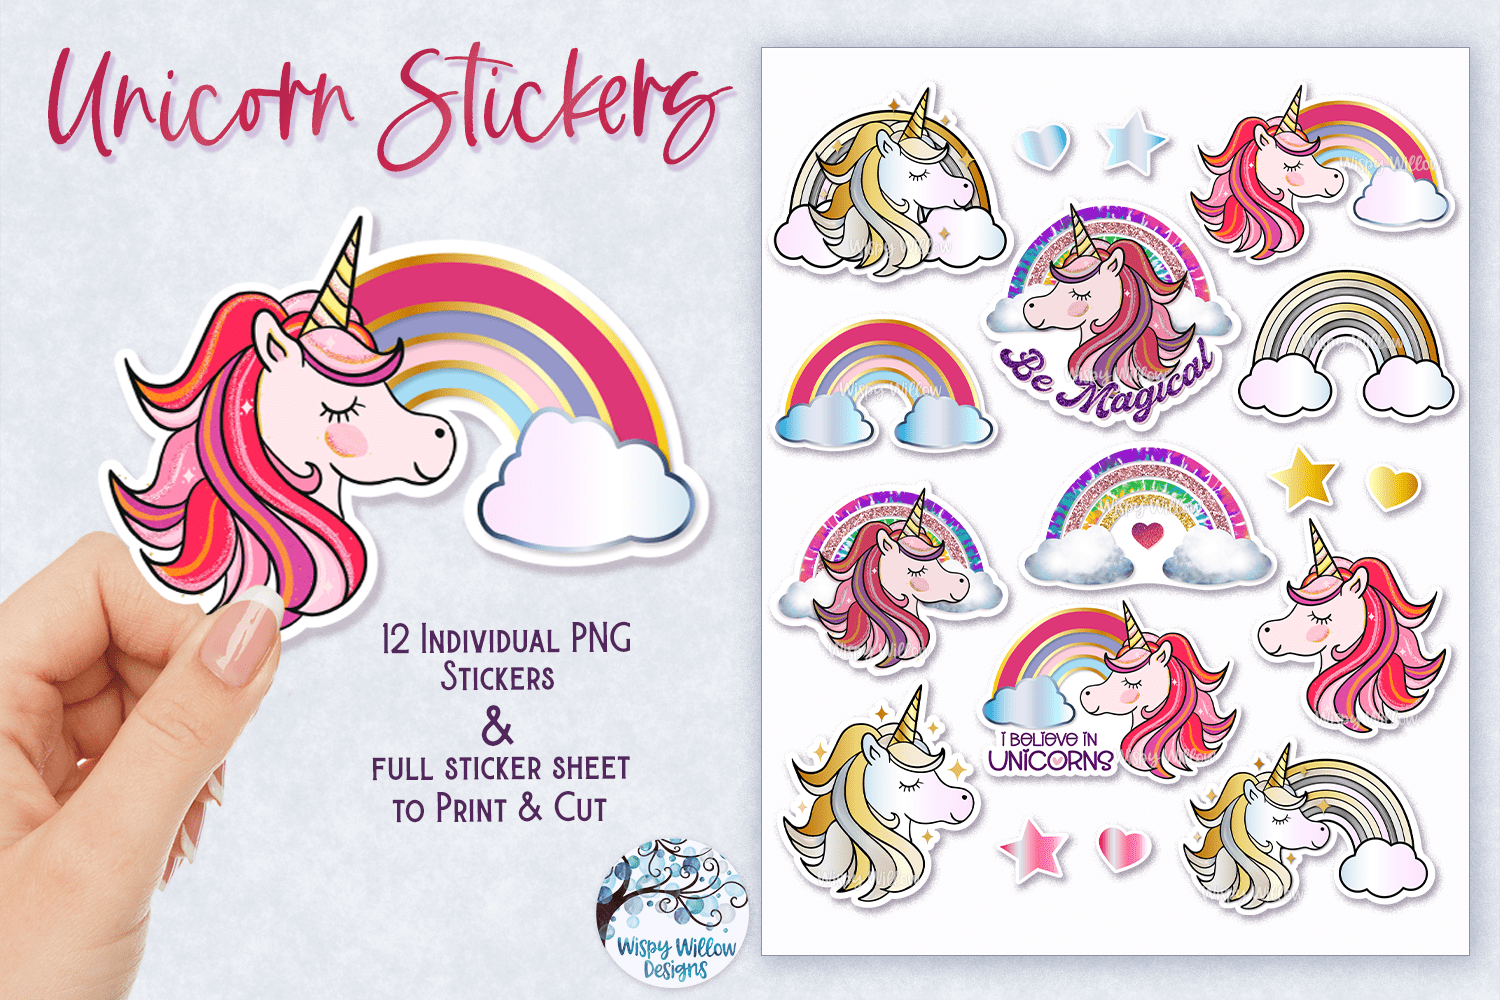 Unicorn and Rainbow Stickers PNG Wispy Willow Designs Company